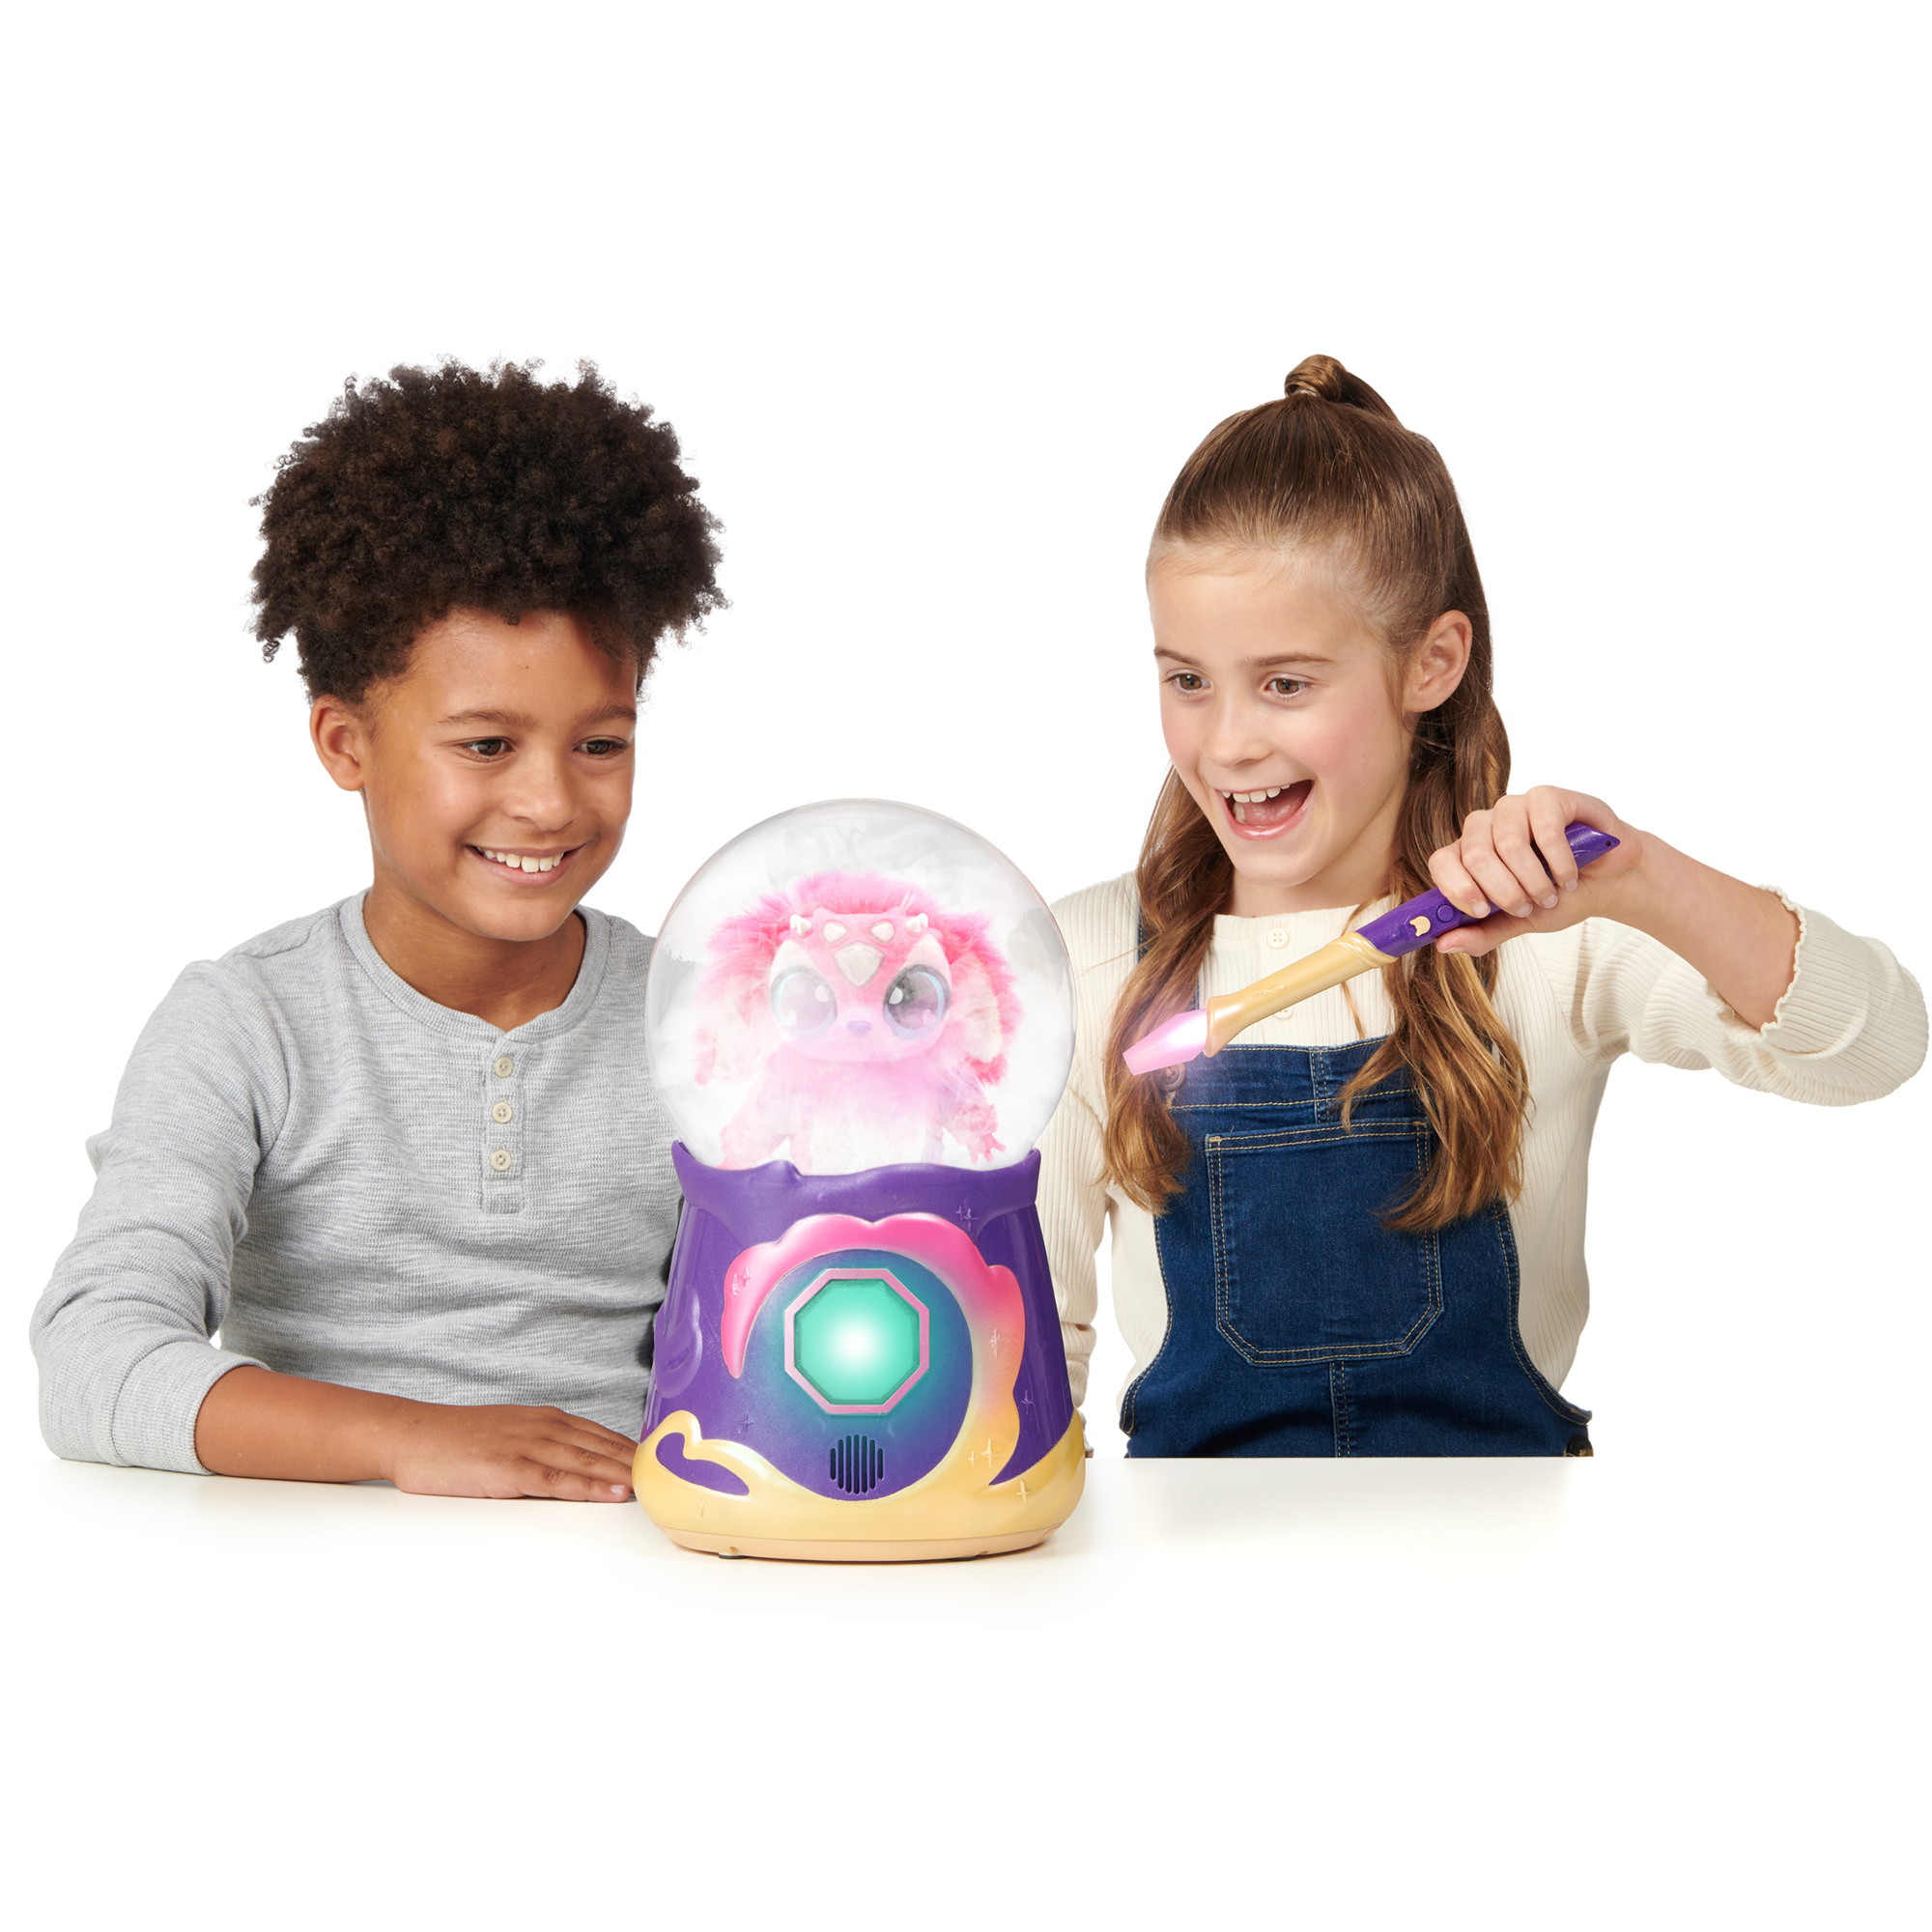 Magic Mixies Magical Misting Crystal Ball with Interactive 8 inch Pink Plush Toy Ages 5+ - image 9 of 18